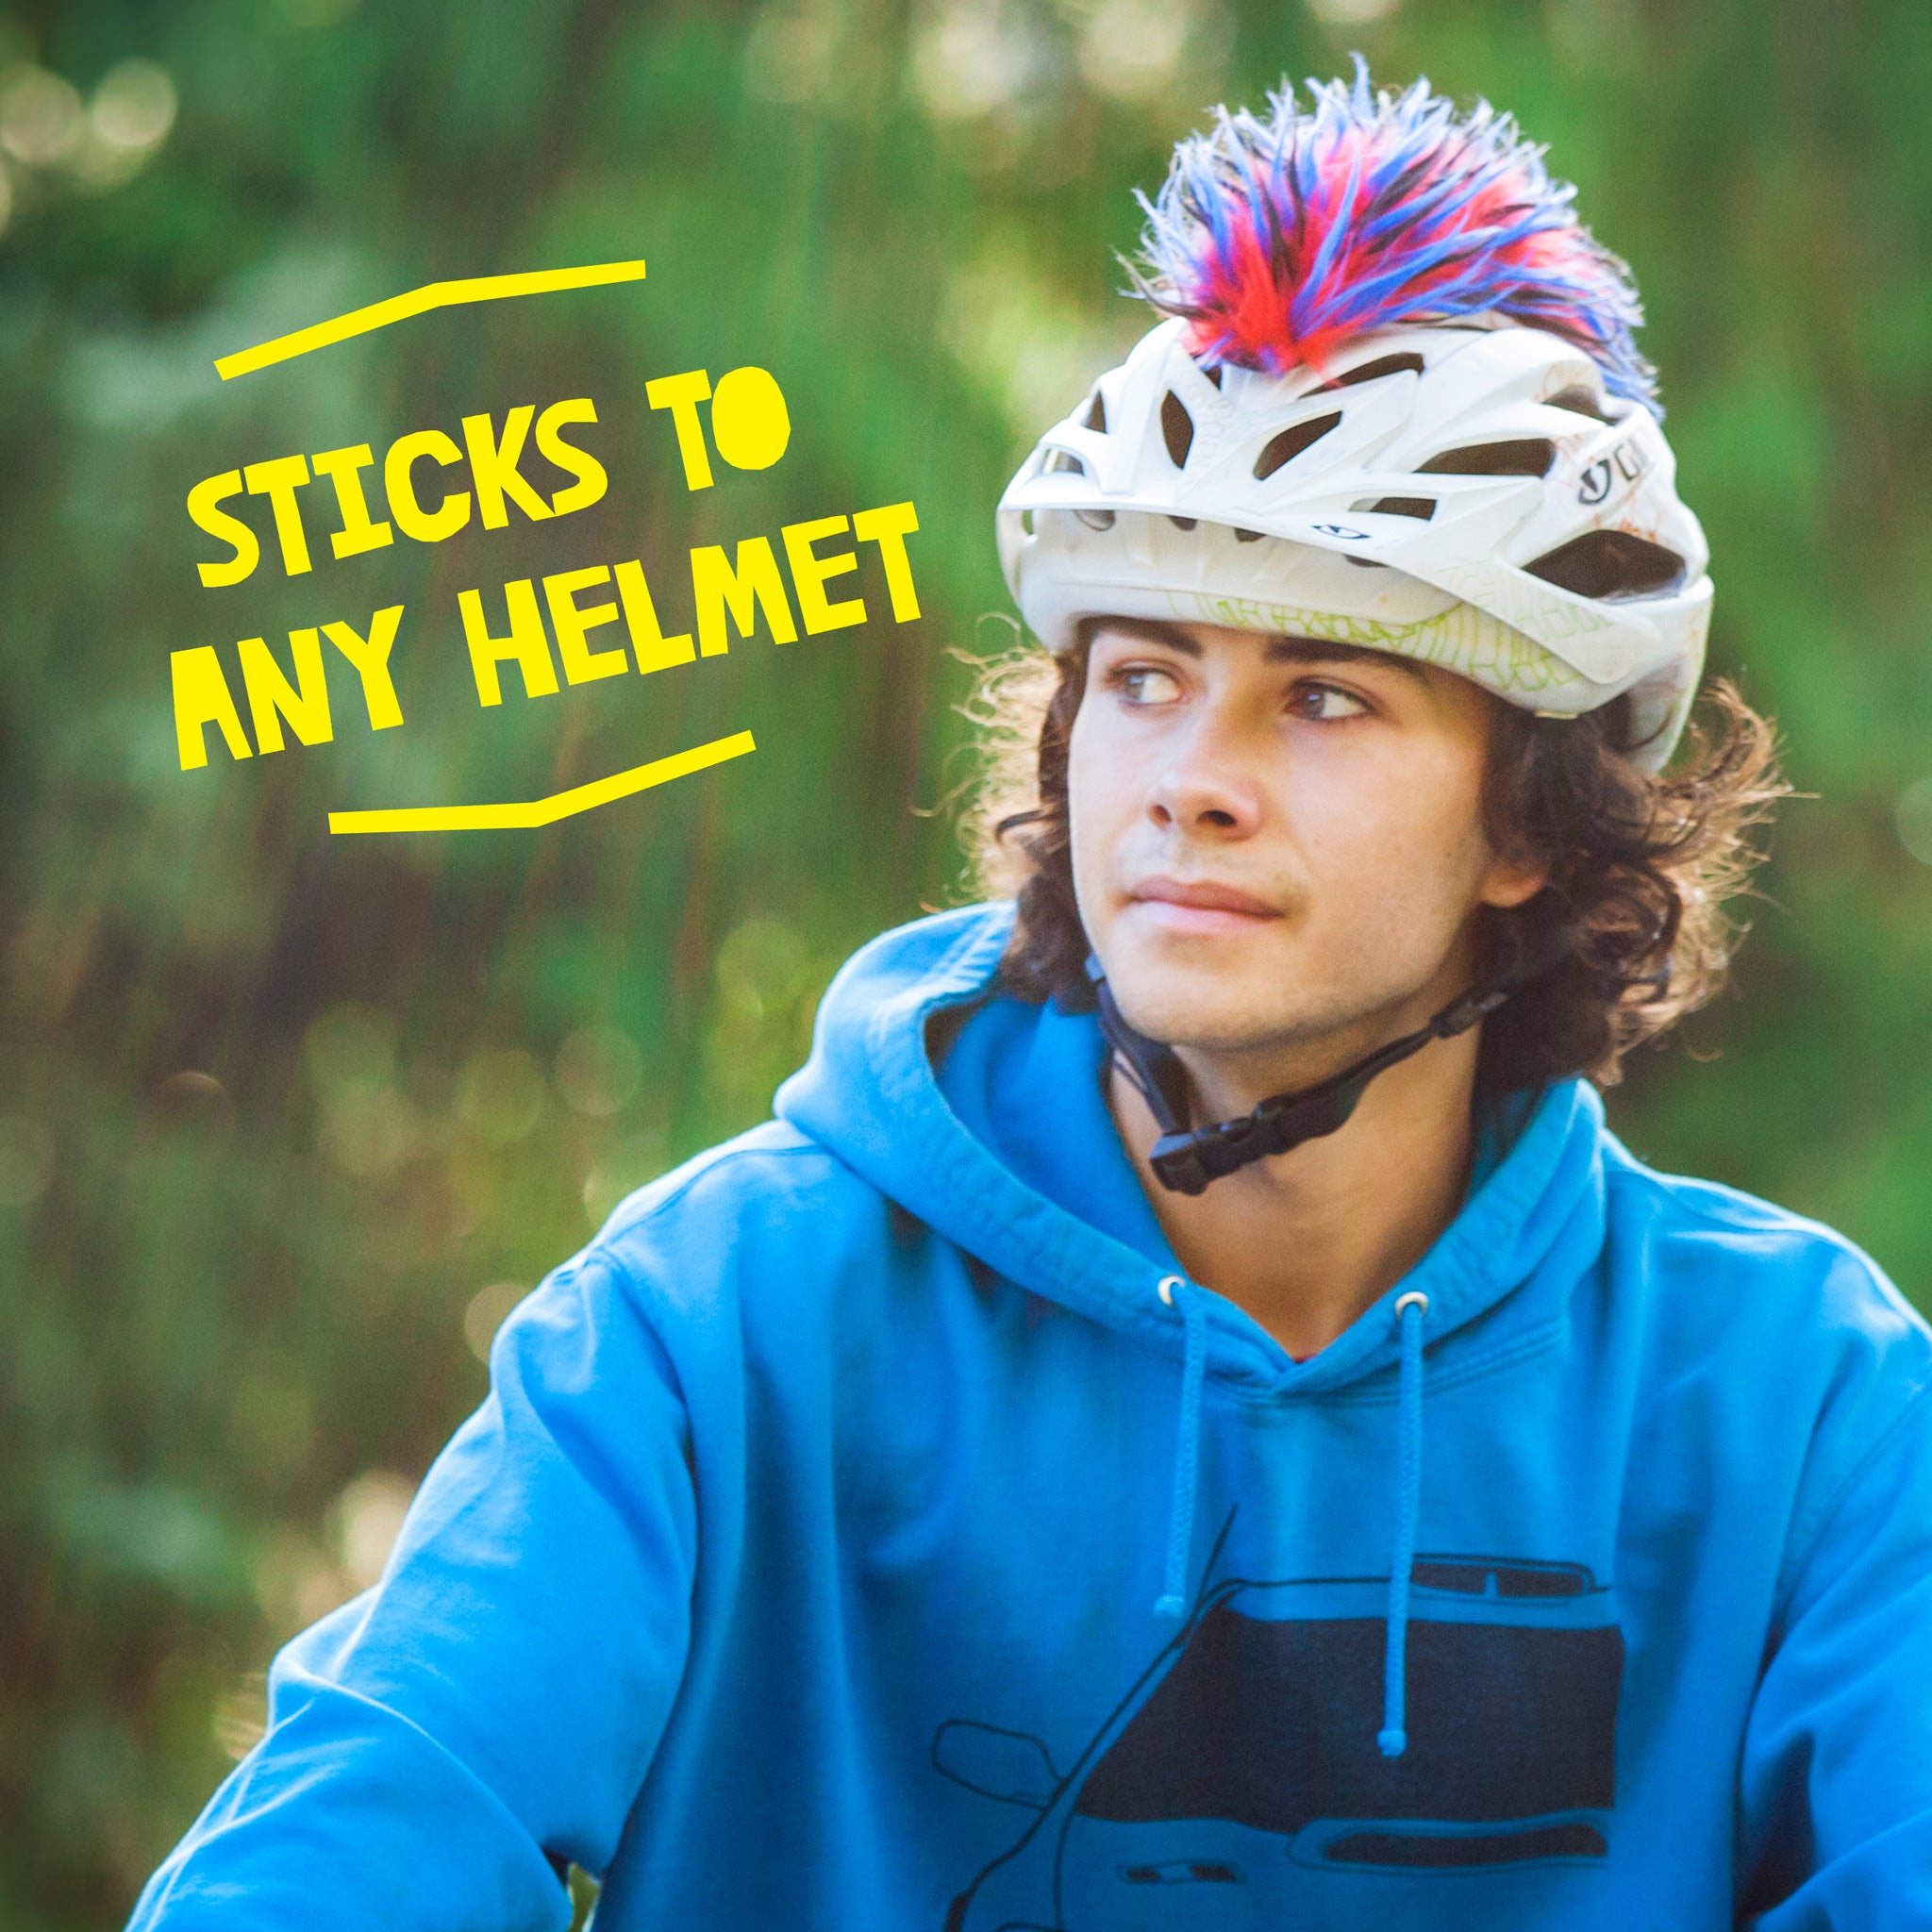 Fun Helmet Mohawk Accessory/Cover for Kids and Adults